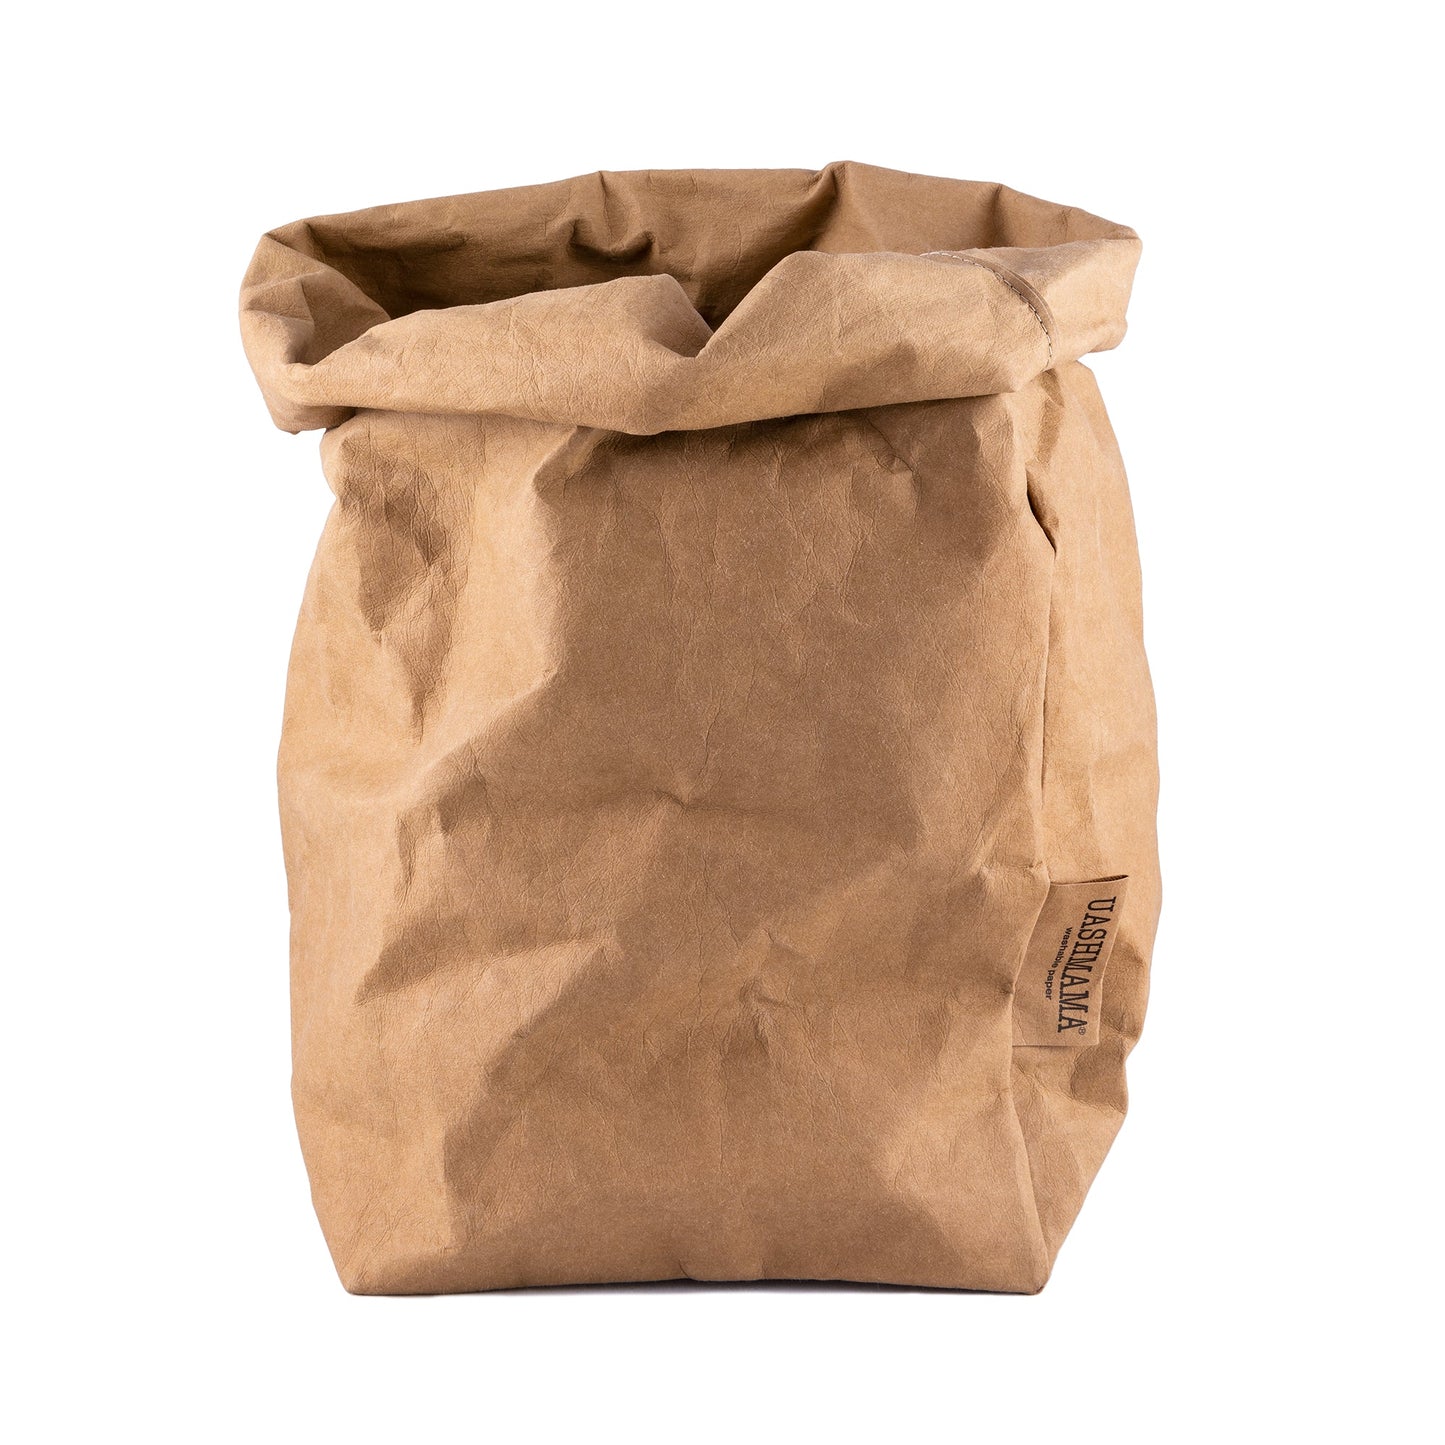 A washable paper bag is shown. The bag is rolled down at the top and features a UASHMAMA logo label on the bottom left corner. The bag pictured is the extra large size in tan.